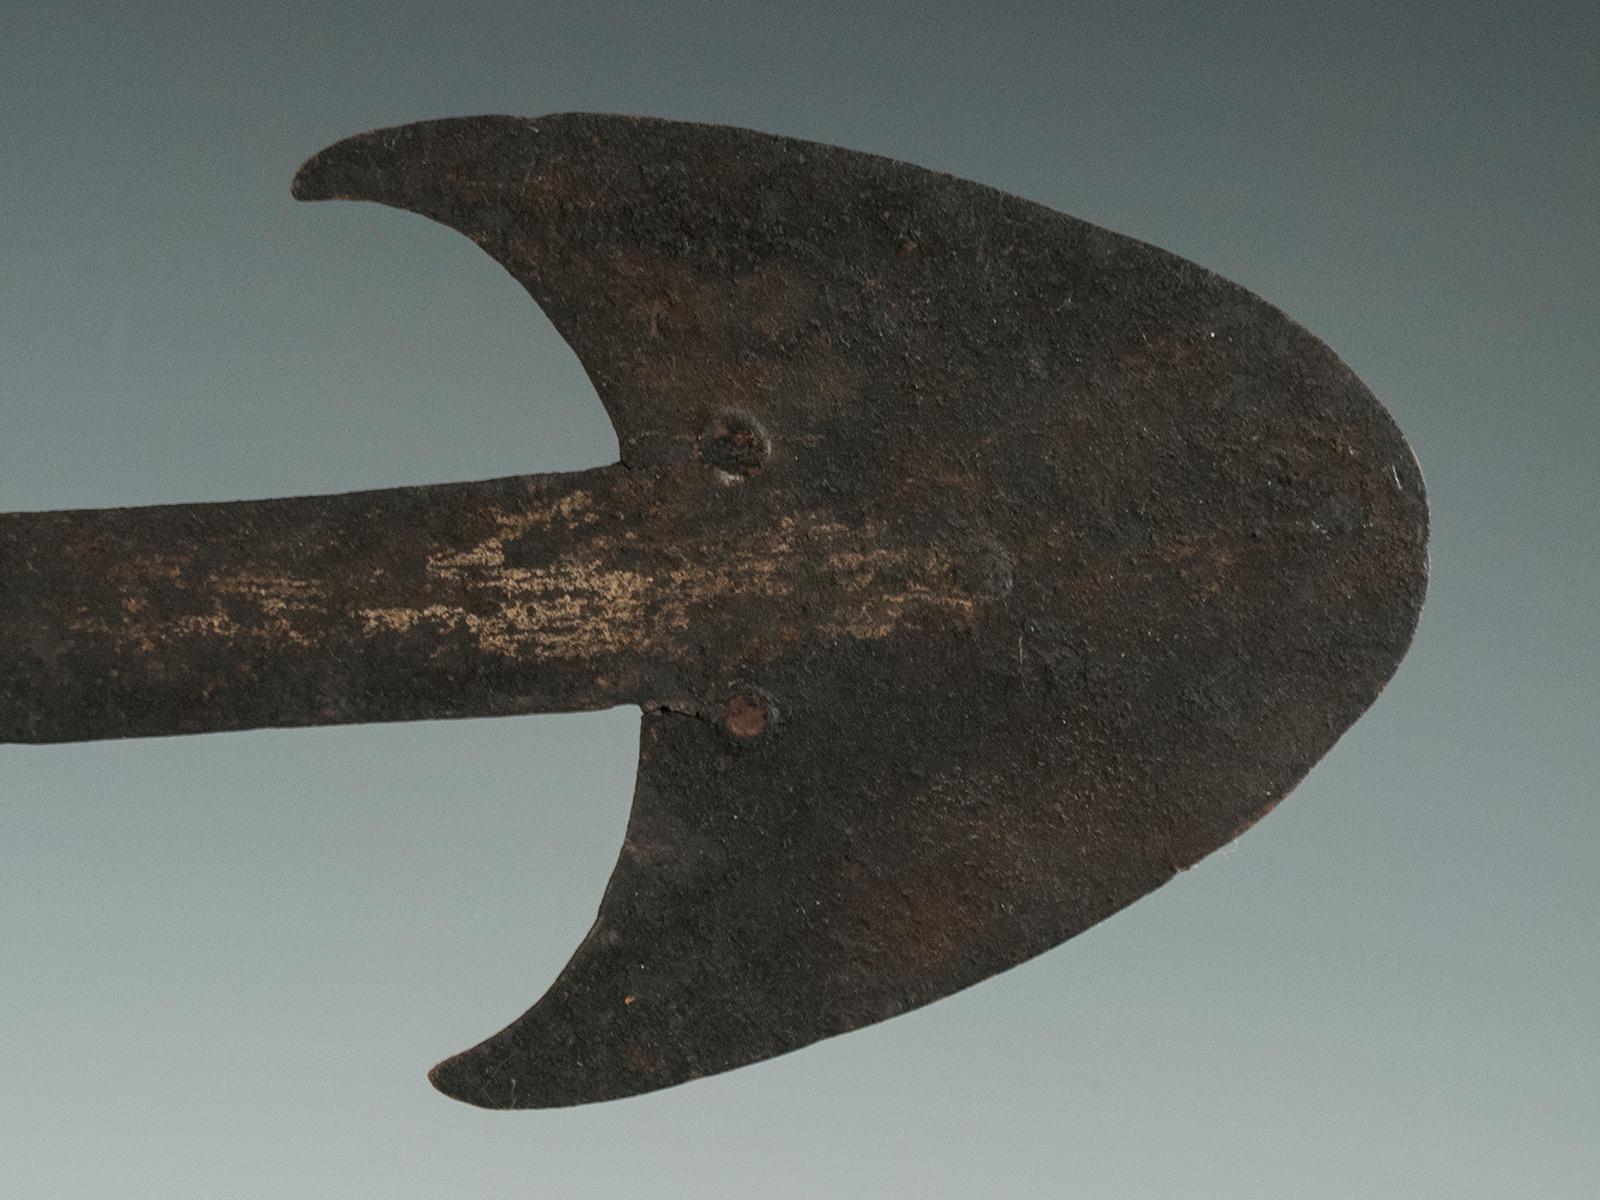 Cameroonian Early to Mid-20th Century Tribal Iron Currency Blade, Mboum People, Cameroon